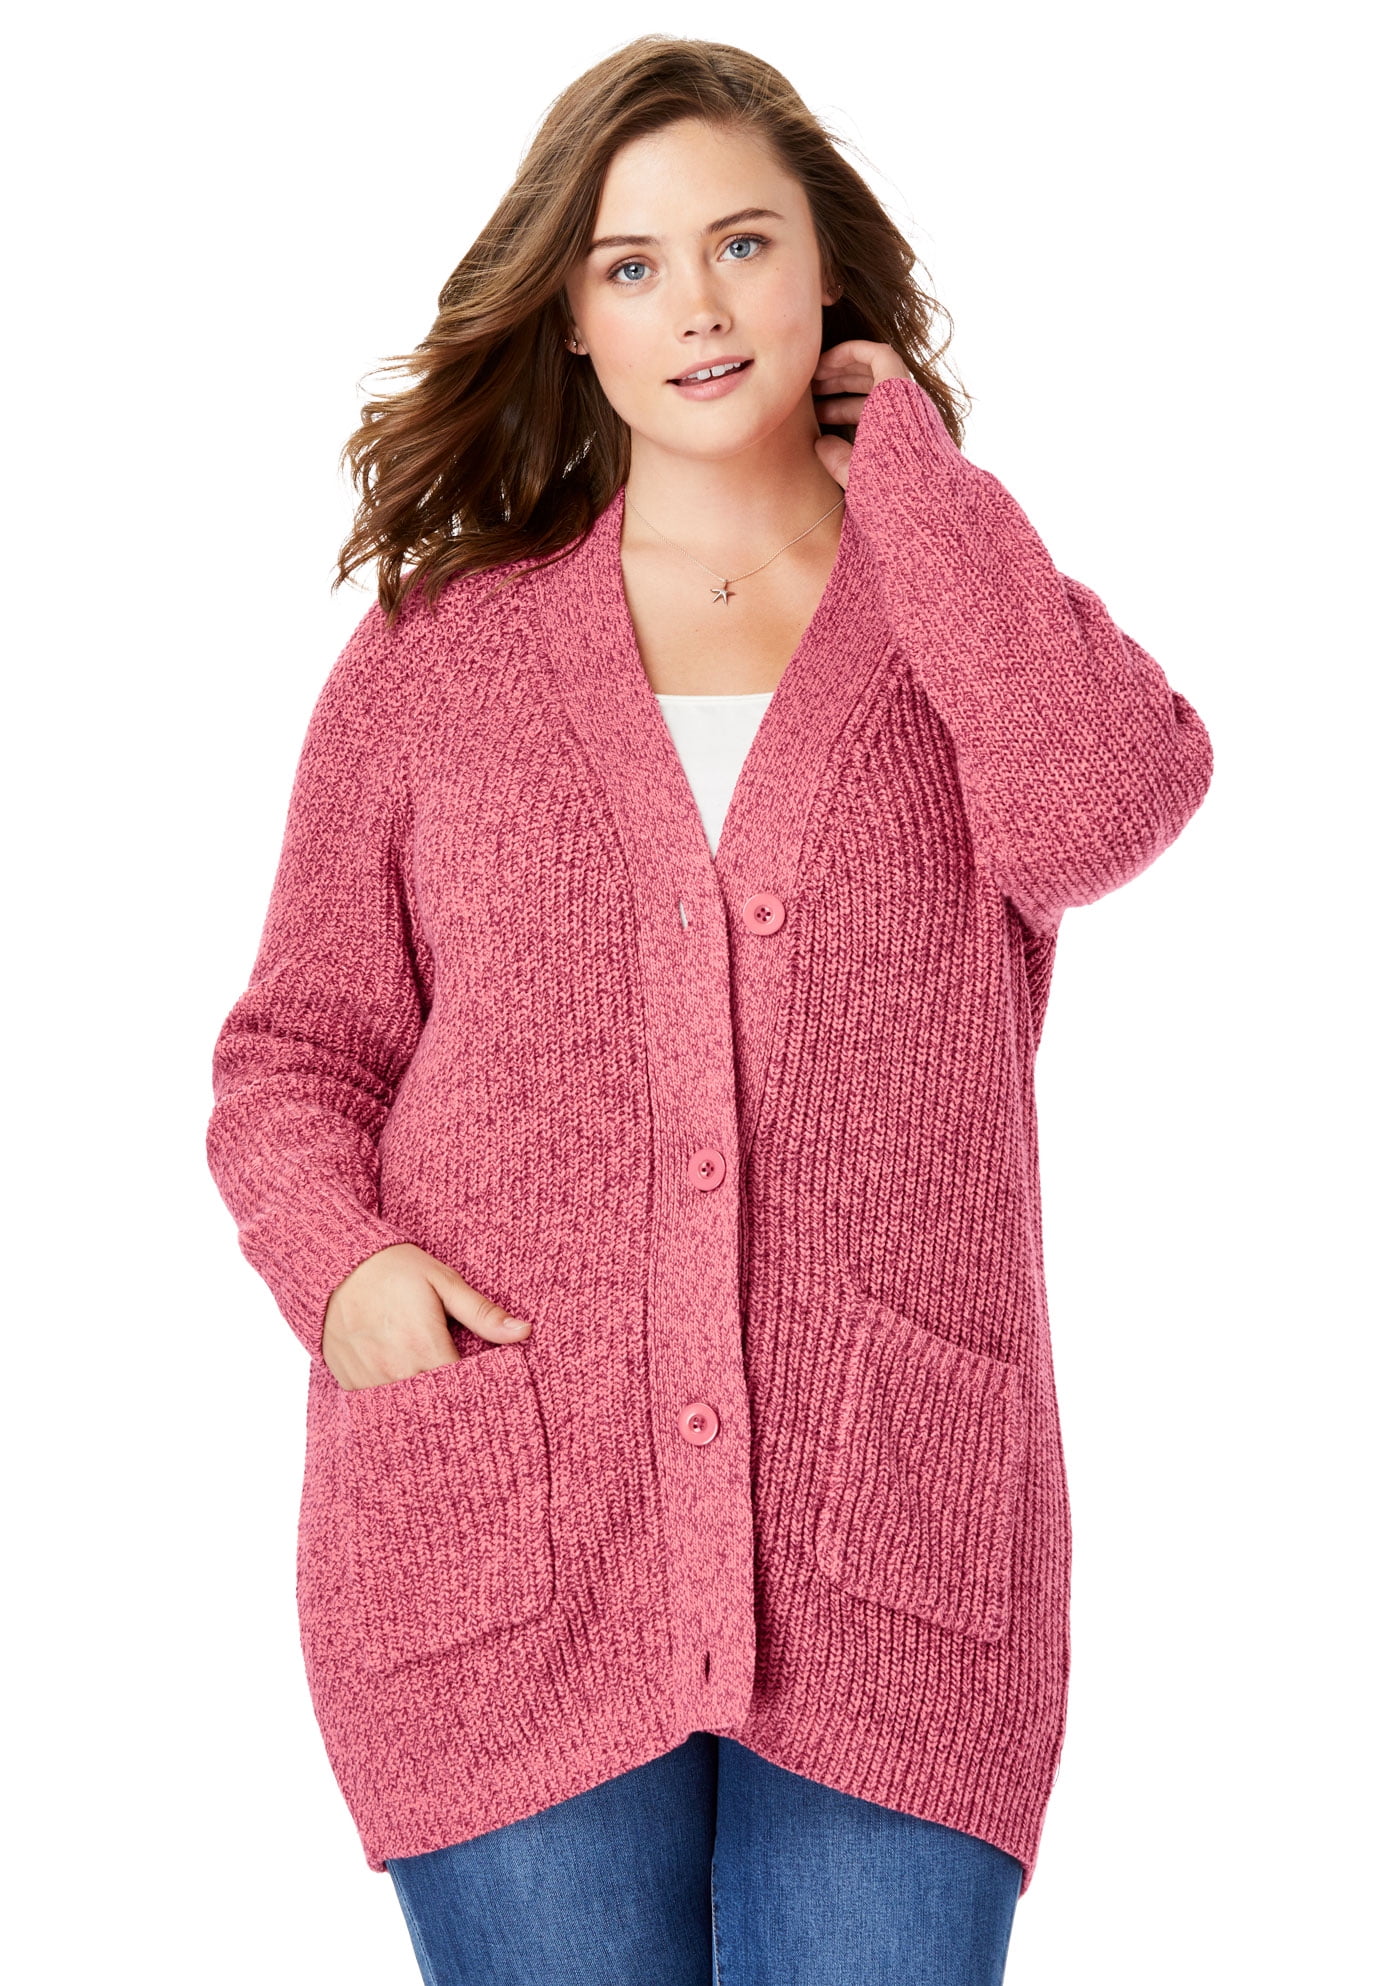 Woman Within - Woman Within Plus Size Long-sleeve Shaker Cardigan ...